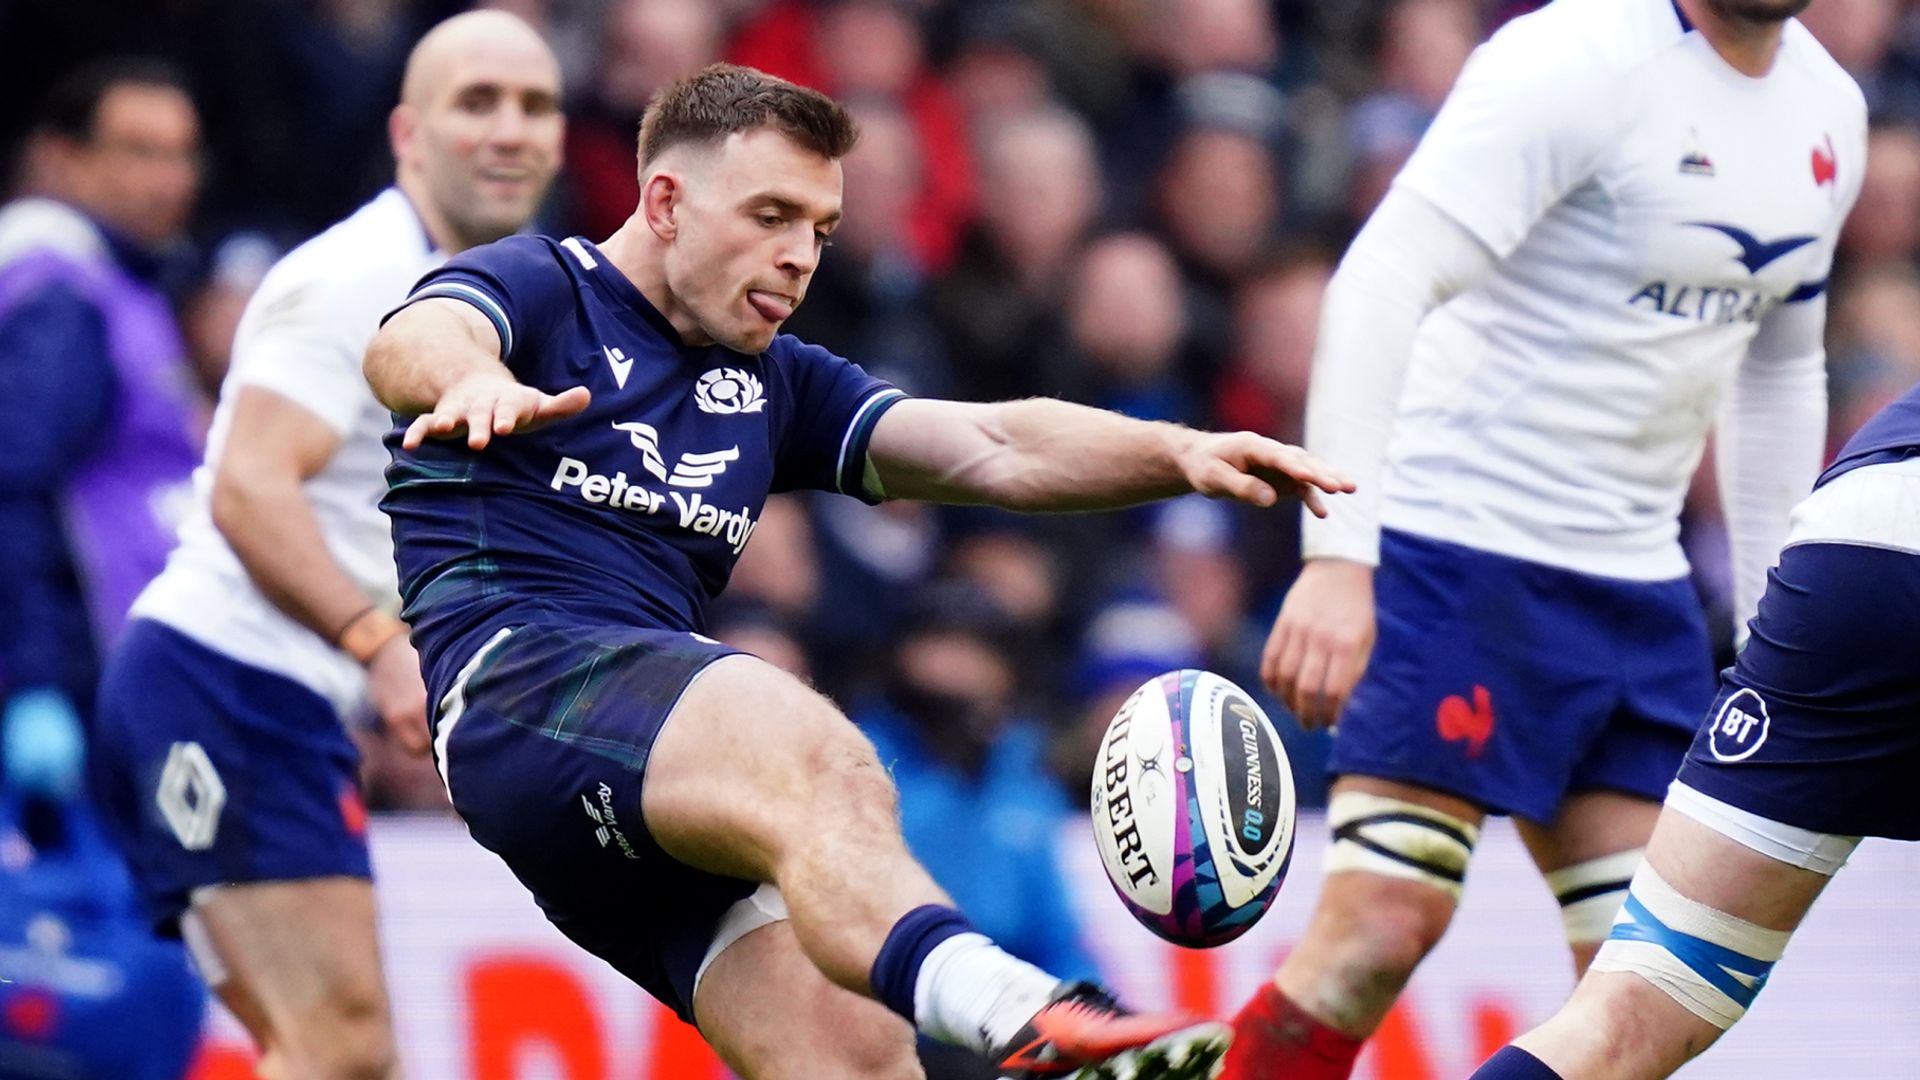 Scotland make two changes as McDowall, White brought in for Dublin